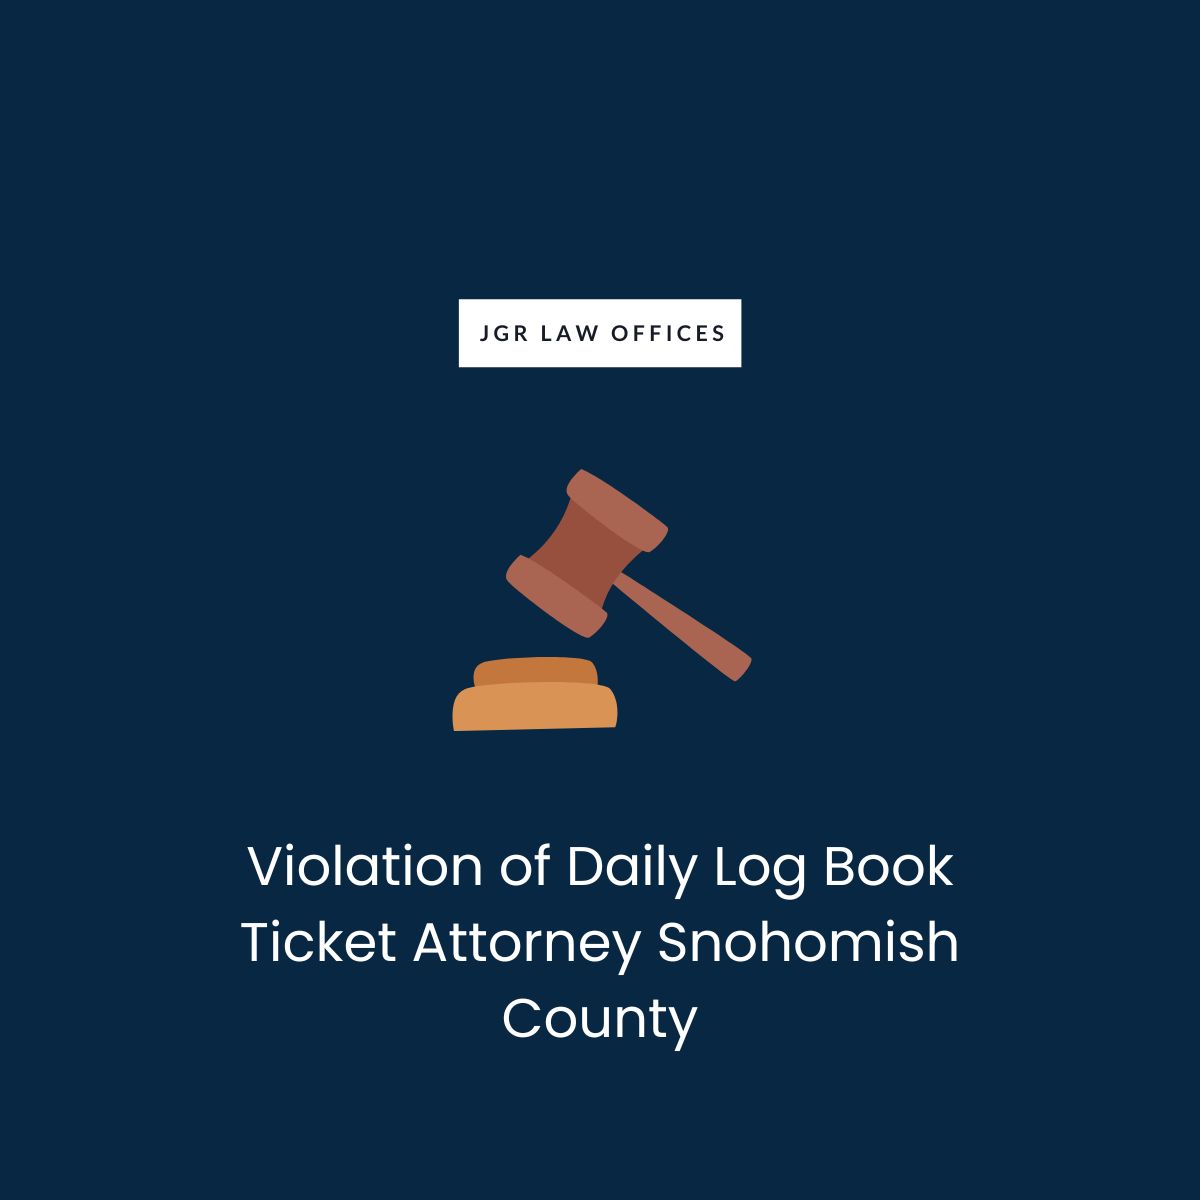 Violation of Daily Log Book Ticket Attorney Snohomish County